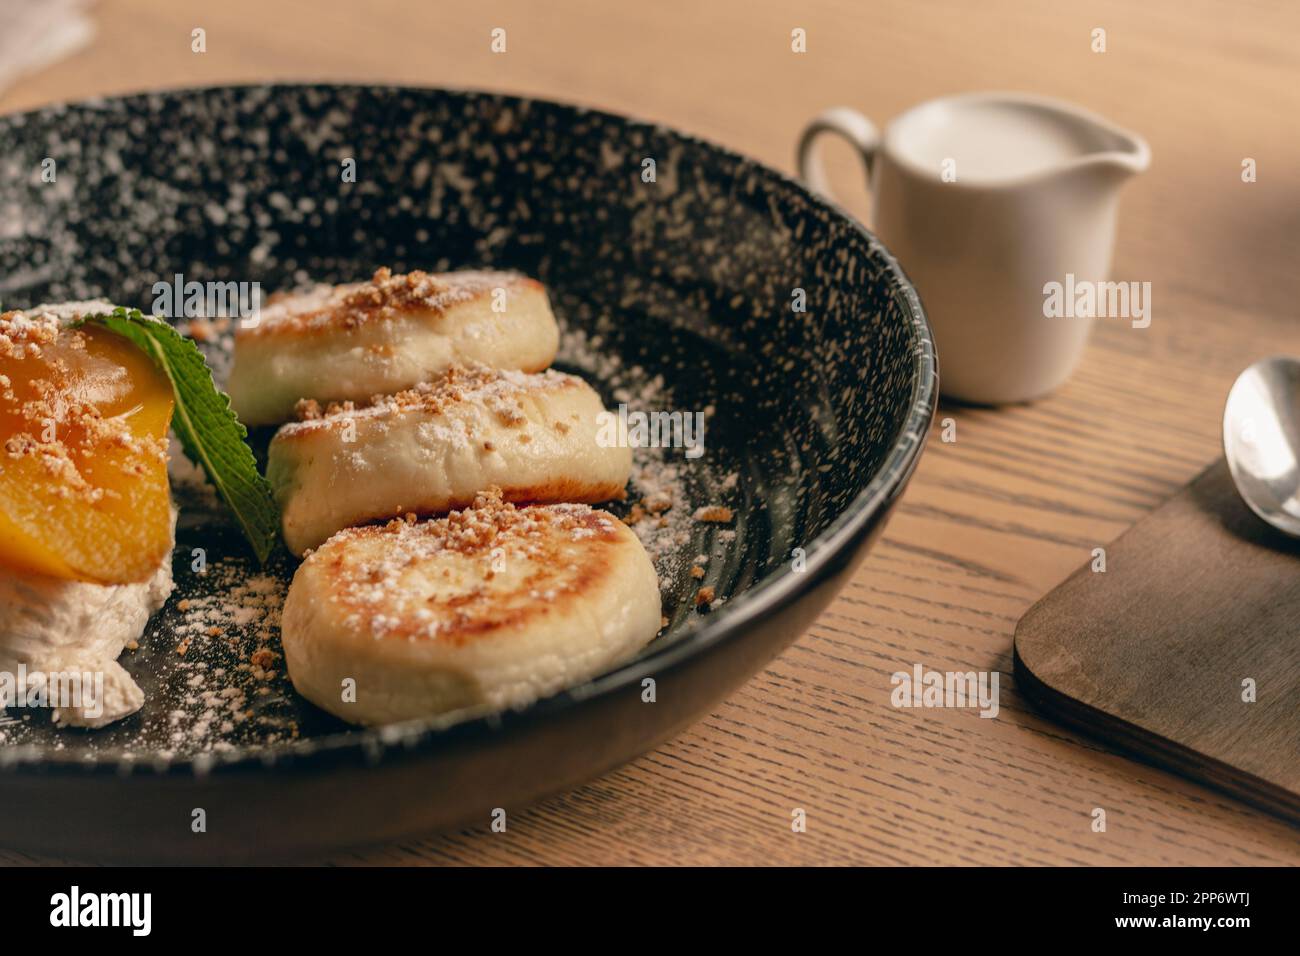 Syrniki with caramel pear and milk cup. Curd cottage pancakes with milk. Delicious breakfast in restaurant. Cheese pancakes close-up. Restaurant menu. Stock Photo